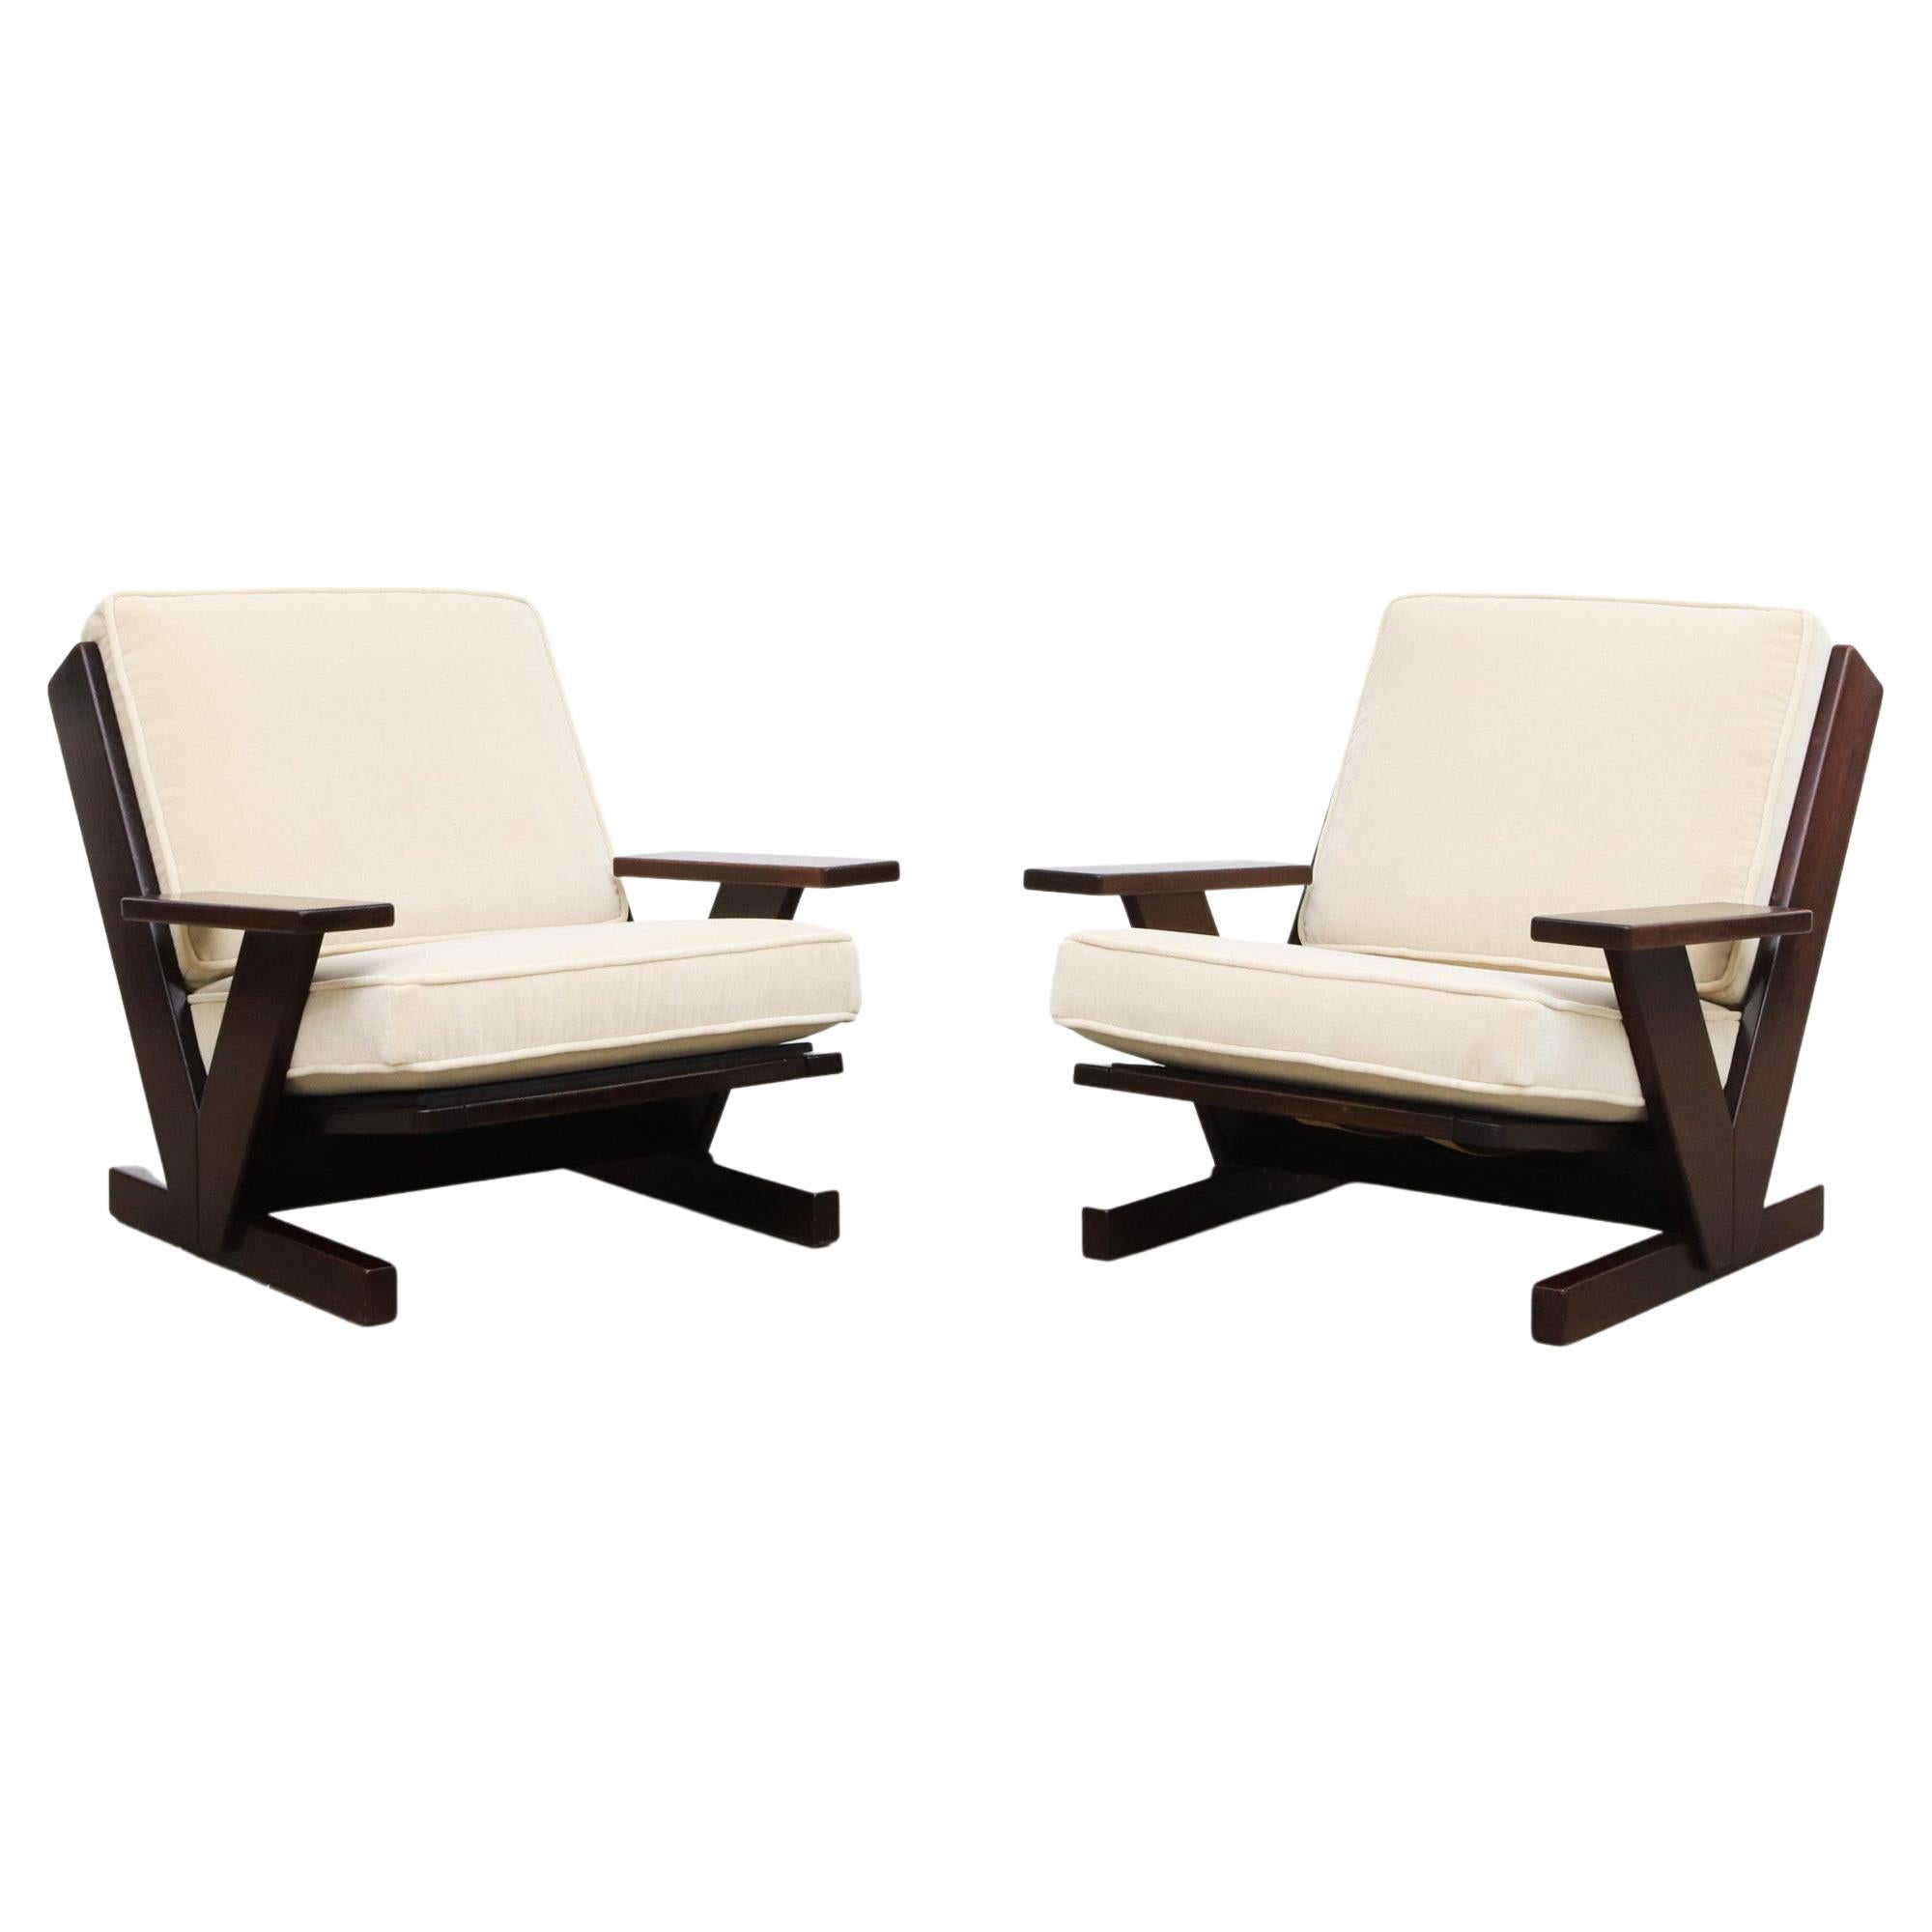 Pair of MOD Wenge and Mohair Lounge Chairs